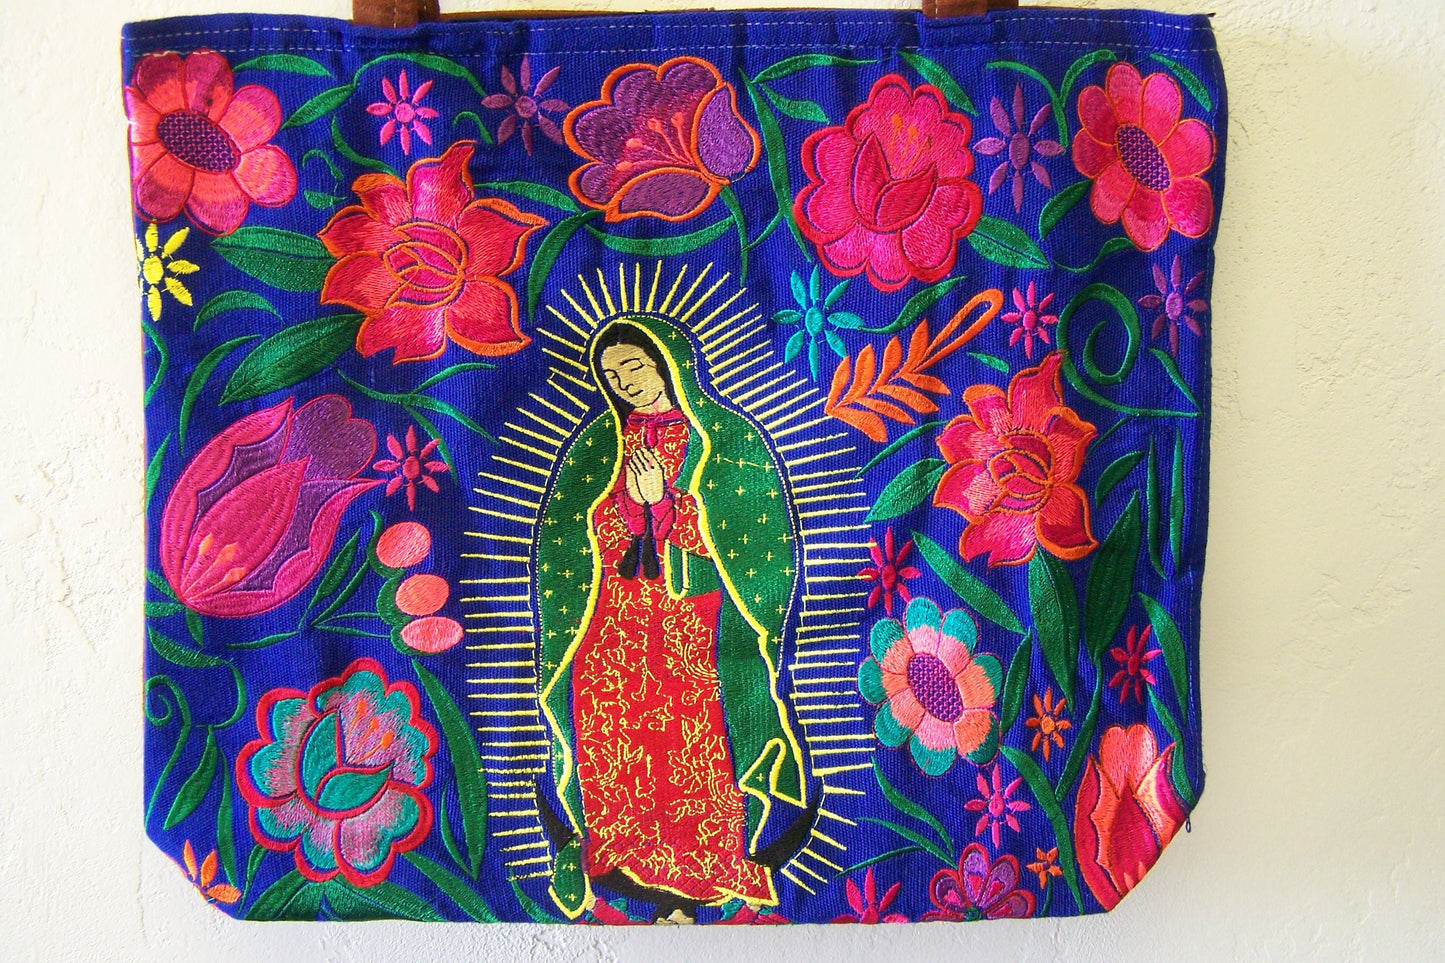 Virgin of Guadalupe Large Embroidered Leather Shoulder Bag Purse, Lined Interior, 2 Zipper Pouches - Dark Blue